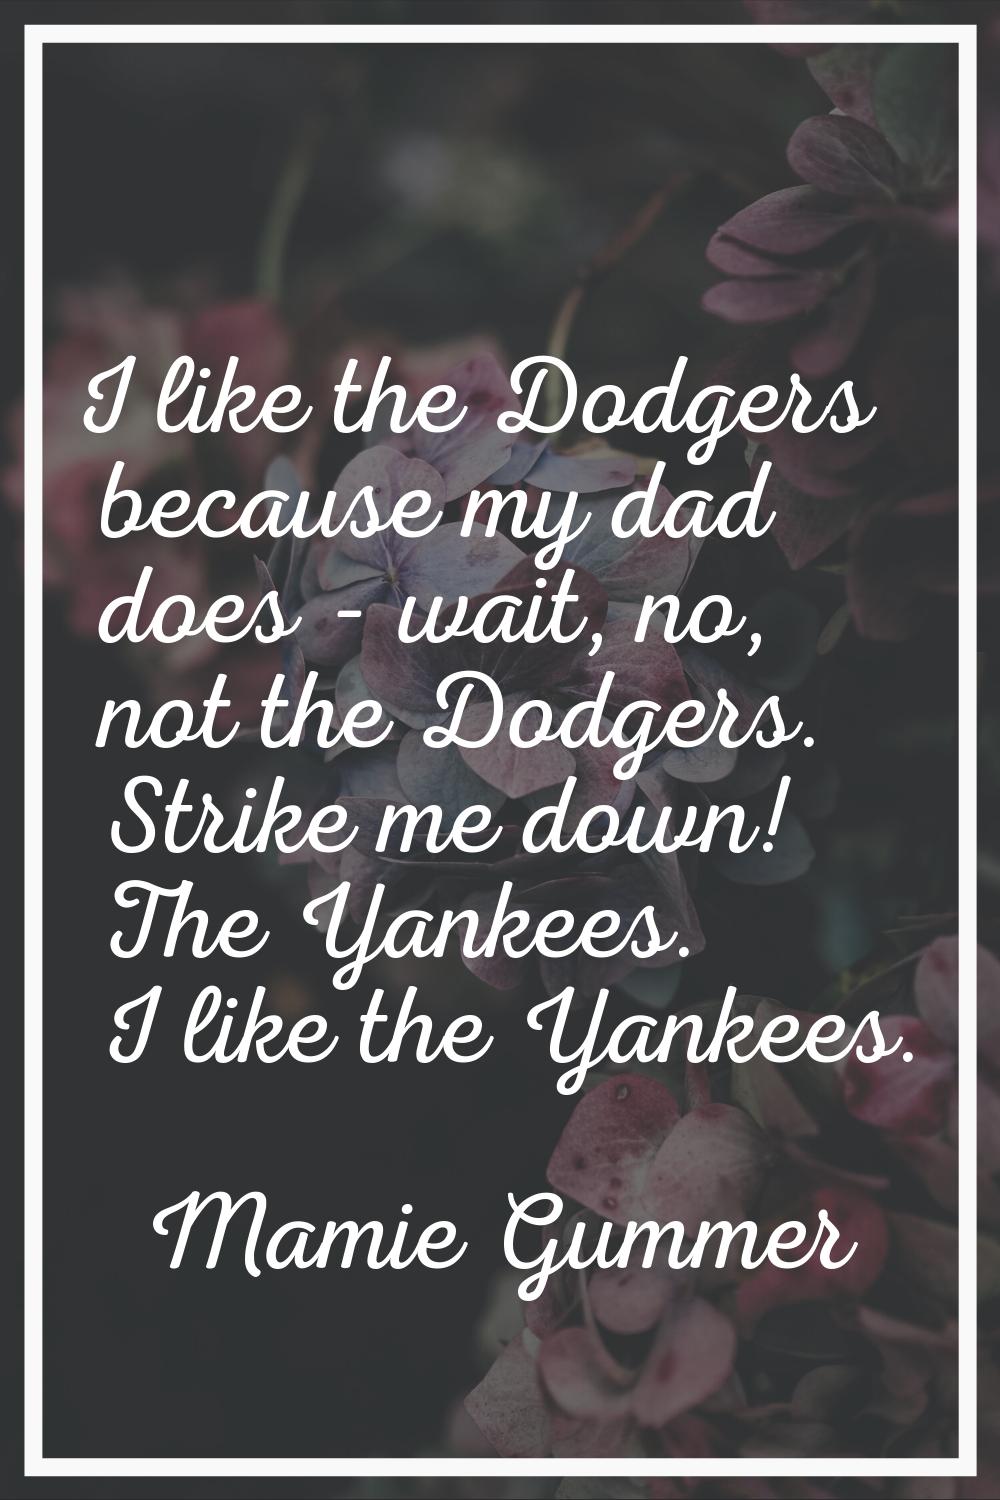 I like the Dodgers because my dad does - wait, no, not the Dodgers. Strike me down! The Yankees. I 